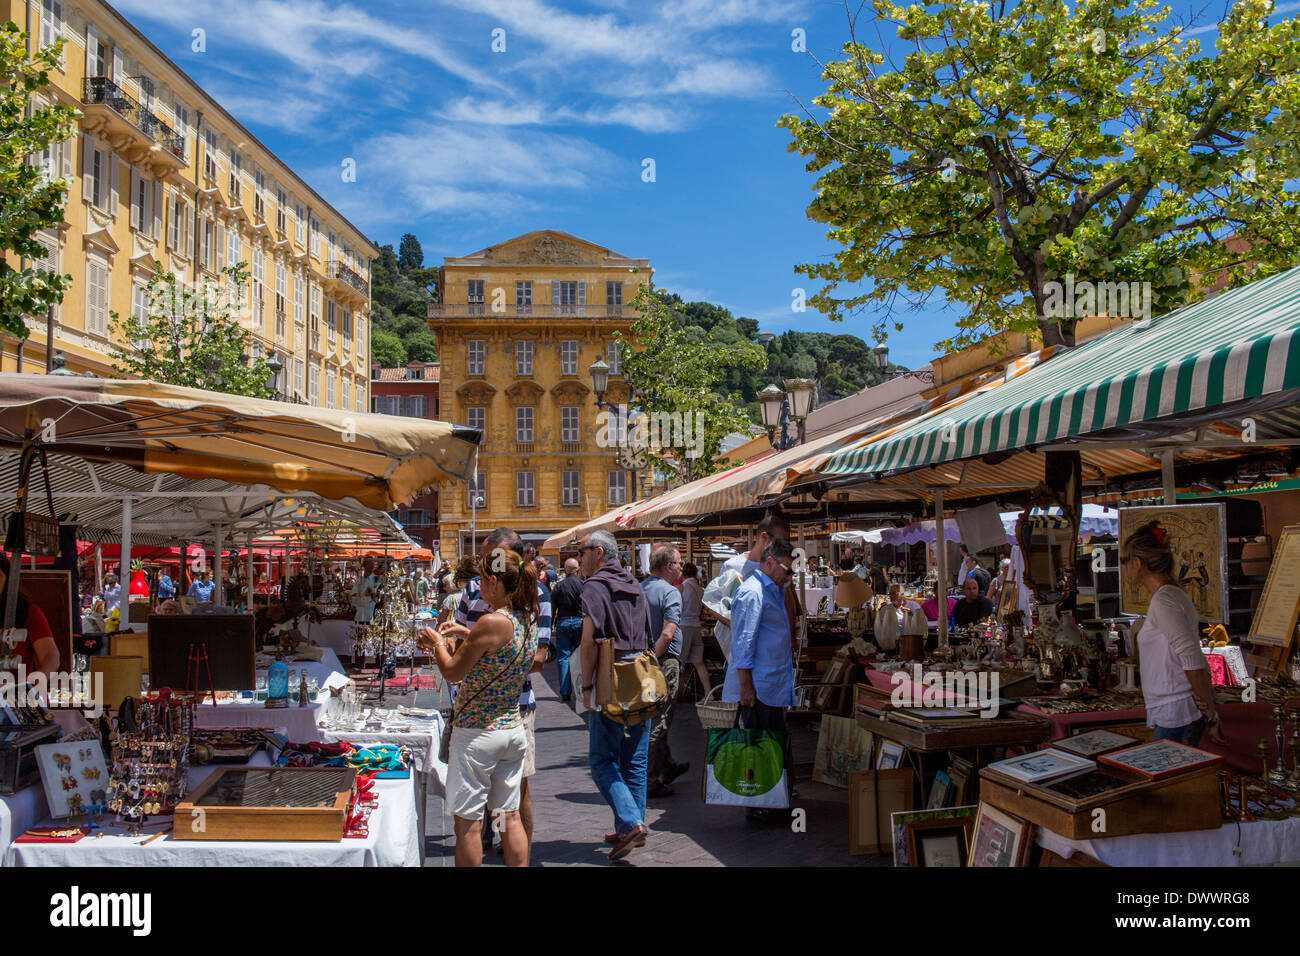 A busy street market in the port of Nice on the Cote d'Azur on the French Riviera in the South of France. Stock Photo